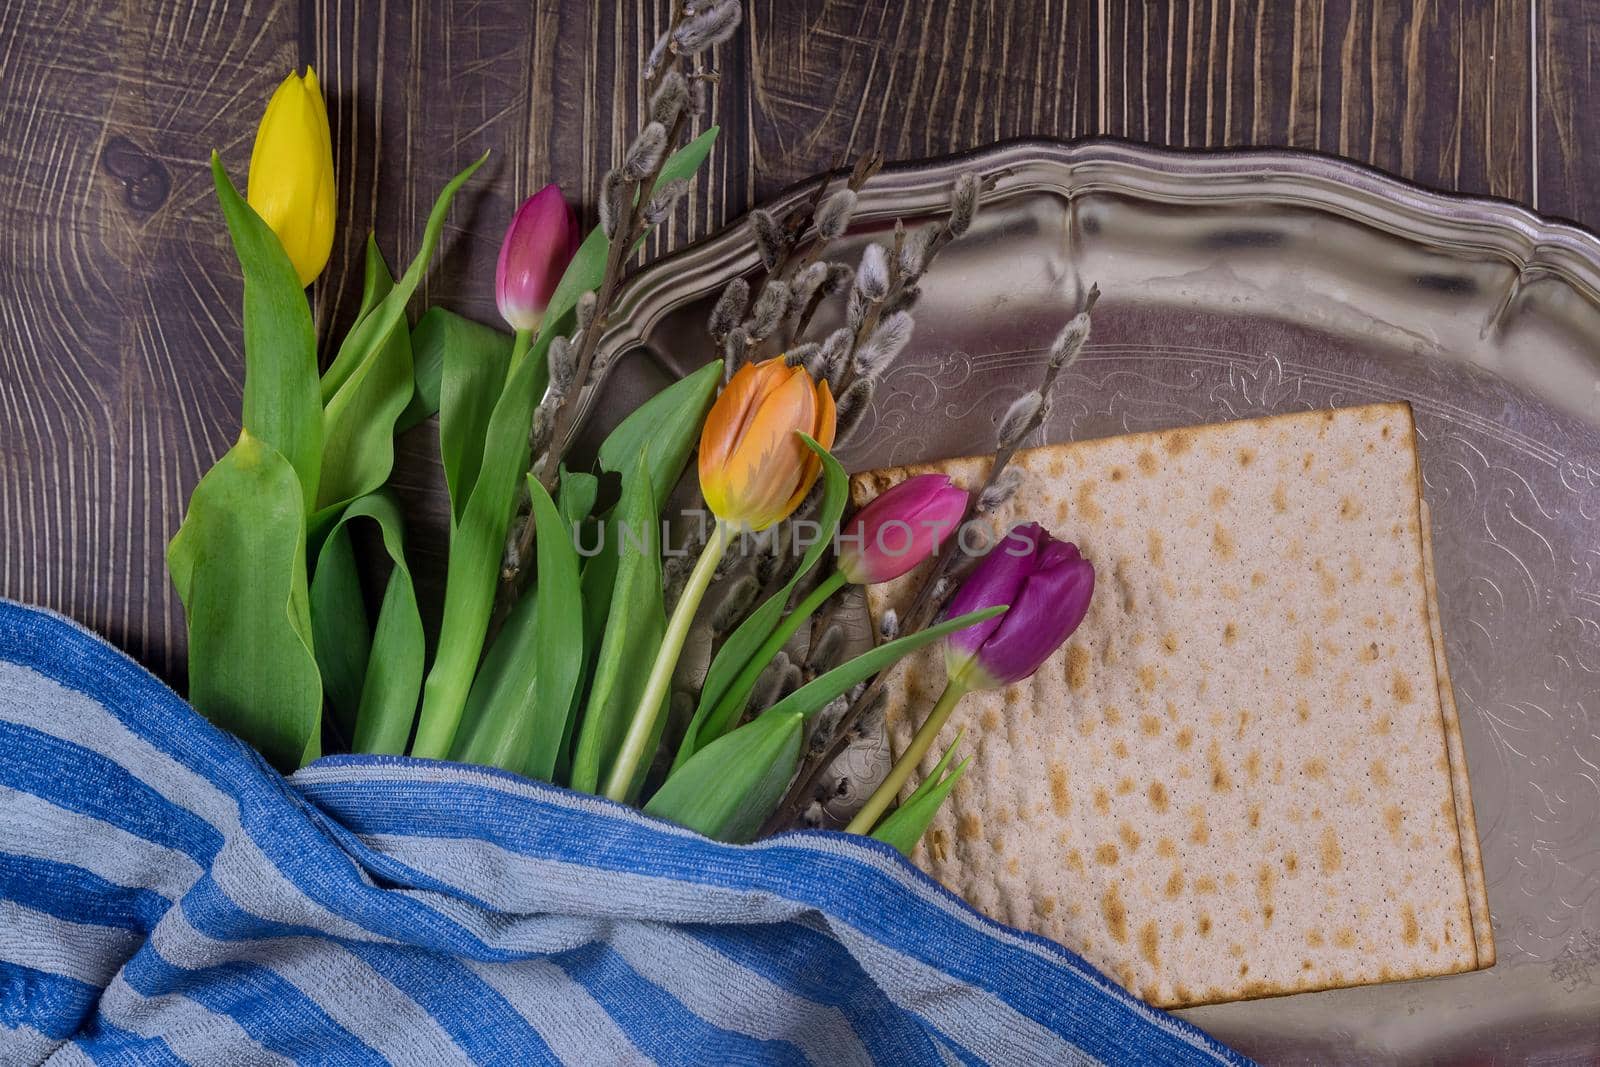 Jewish ceremony ritual with matzos on Passover celebration the Pesach holiday